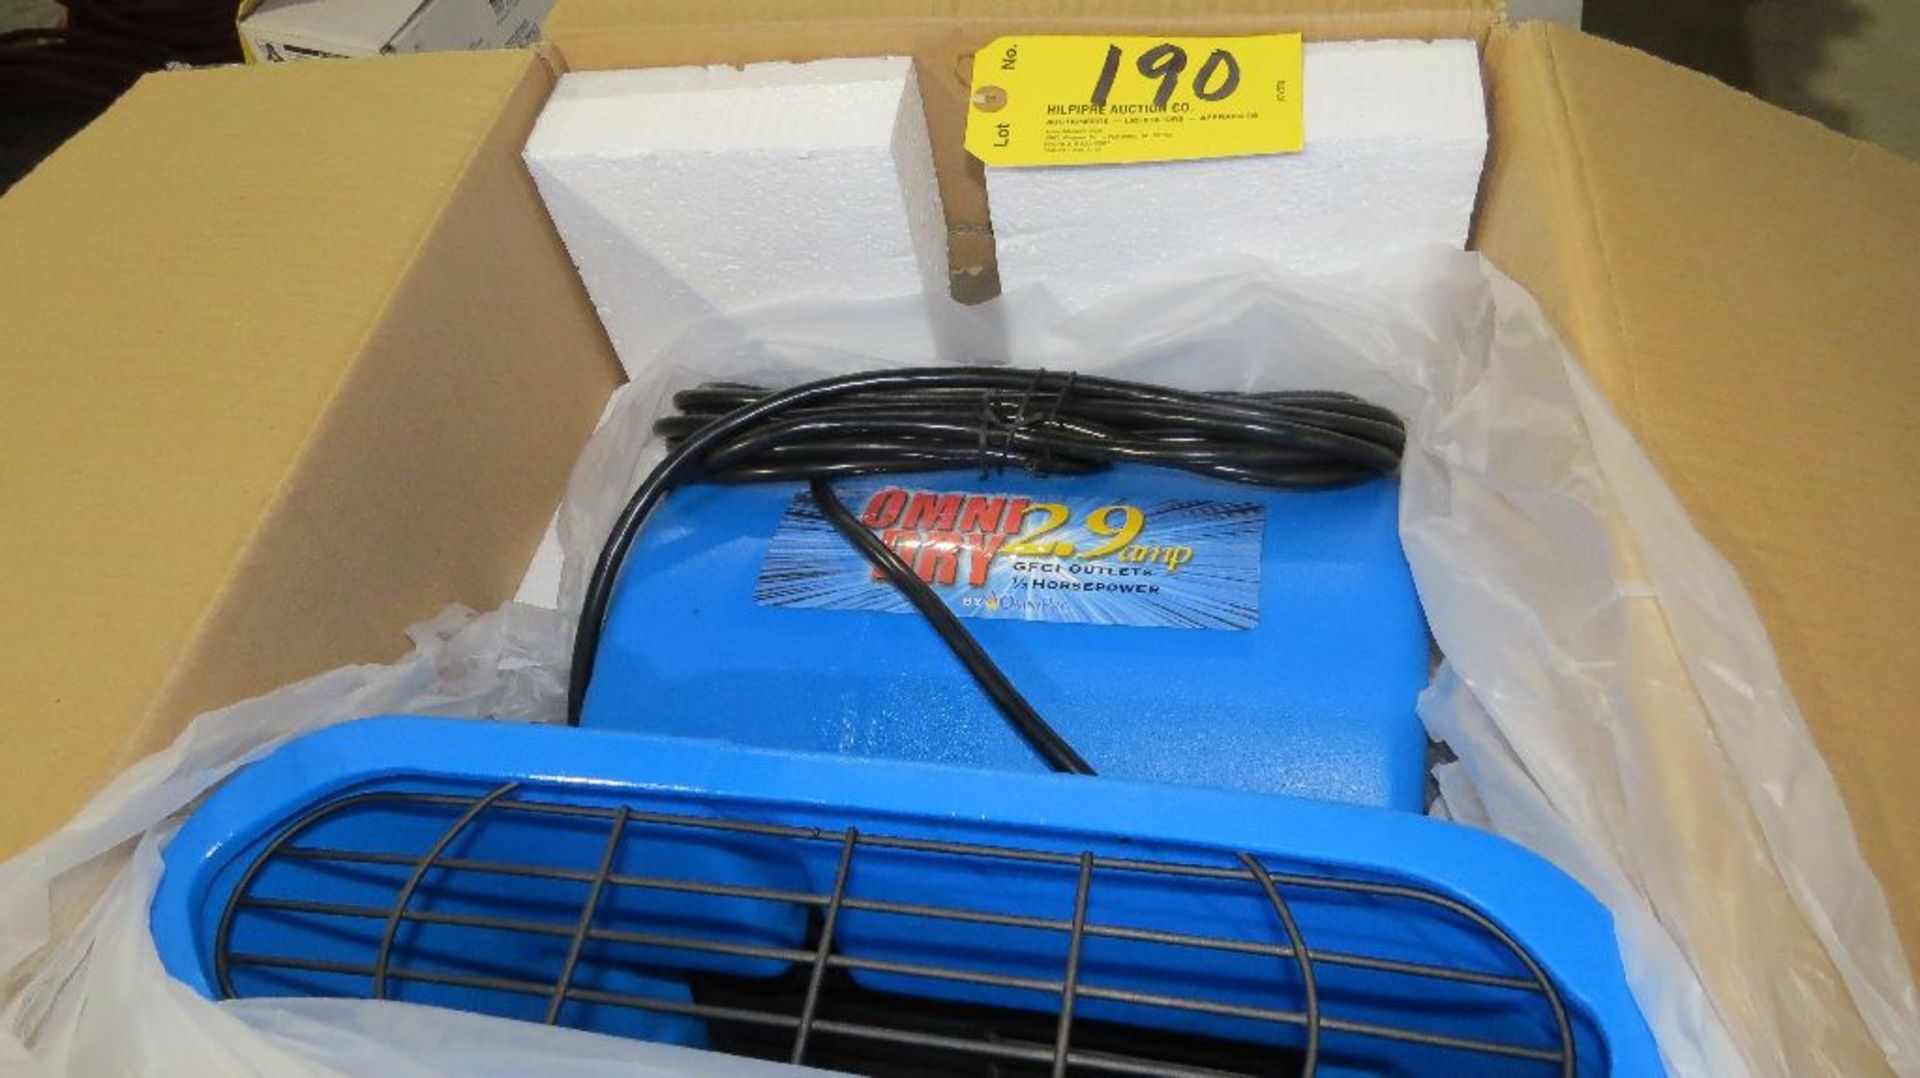 OMNI DRY #AP110004 air mover, (NEW in box).